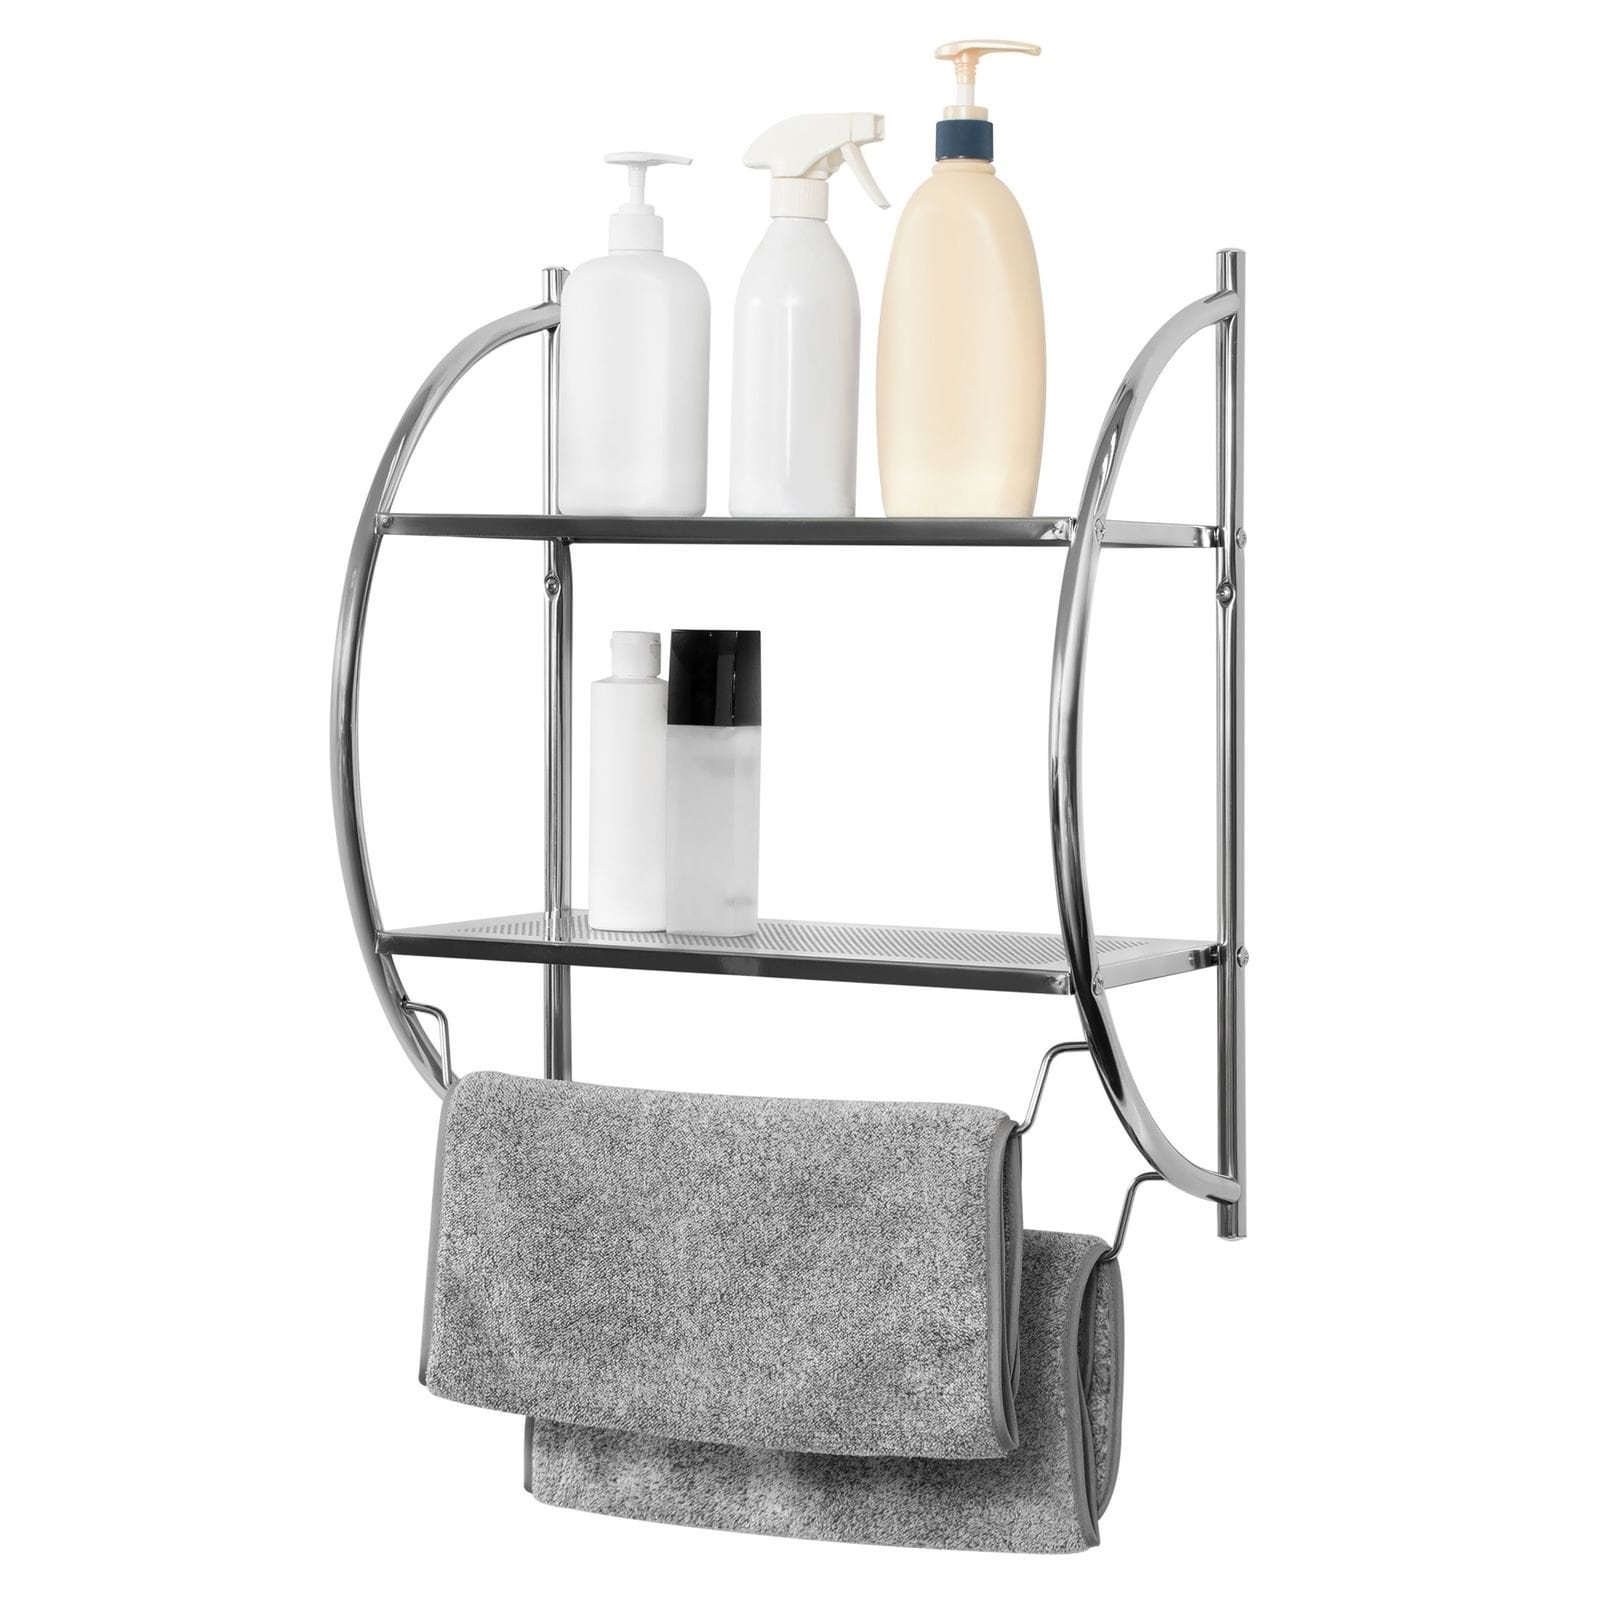 https://ak1.ostkcdn.com/images/products/is/images/direct/3b5a4c109ecd98b0a1faa475c4f4f2e8ebe955ae/2-Tier-Silver-Chrome-Metal-Wall-Mounted-Bathroom-Shelf.jpg